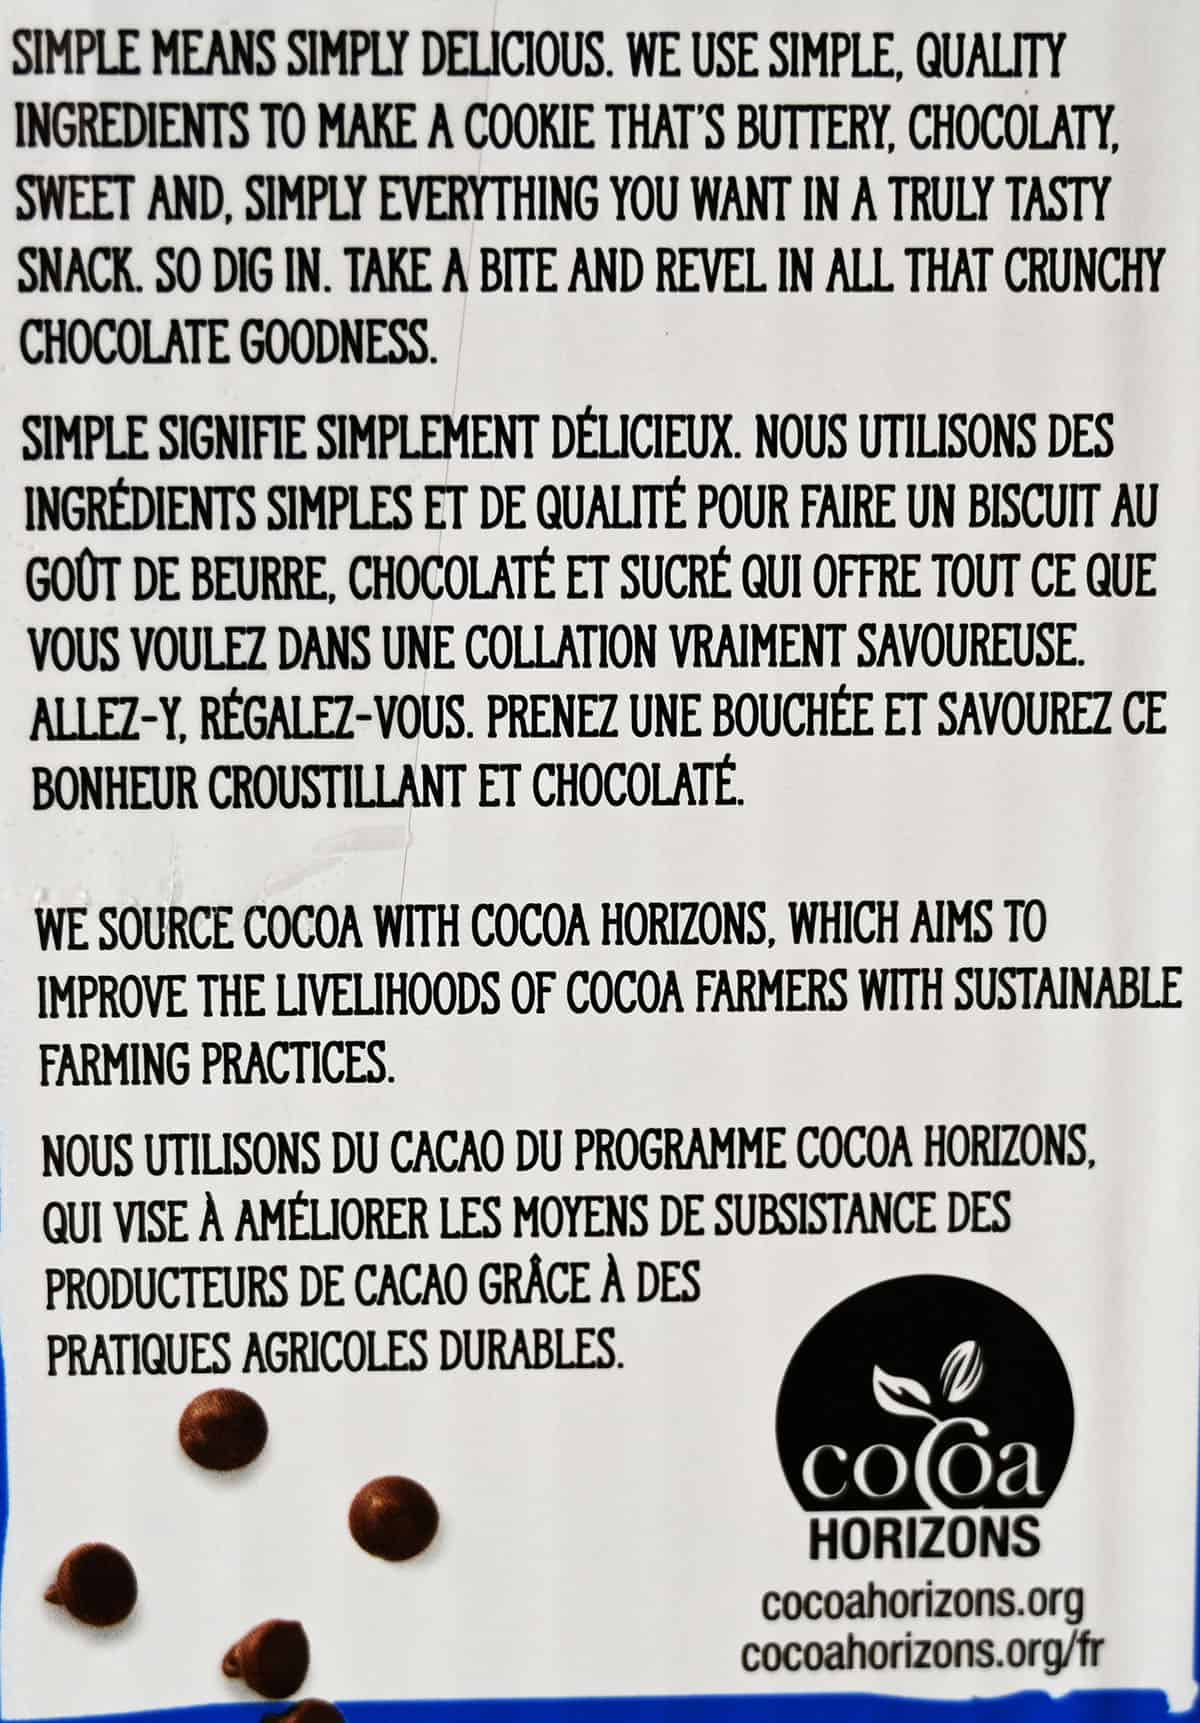 Product description from box explaining the cookies are made with simple ingredients.